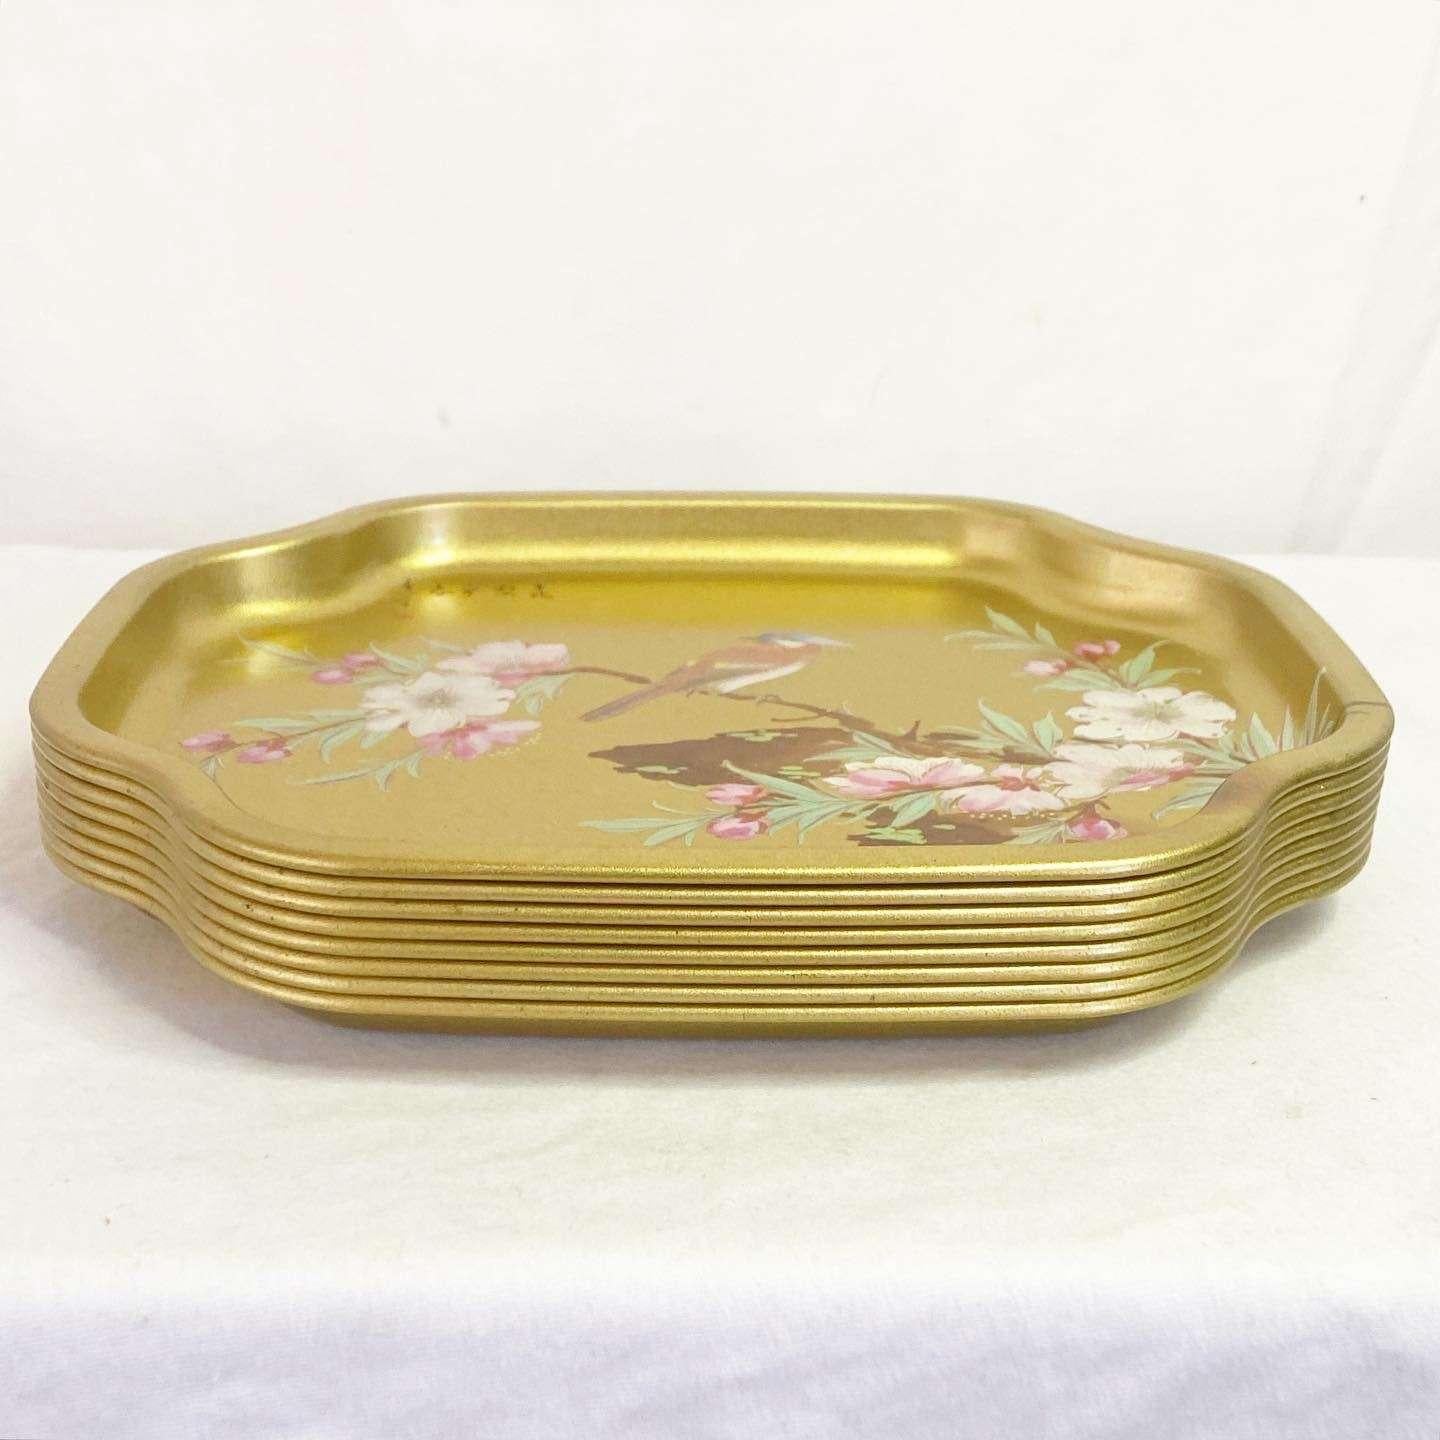 Vintage Chinoiserie Elite Gold Aviary and Blossoms Trays - 8 Pieces In Good Condition For Sale In Delray Beach, FL